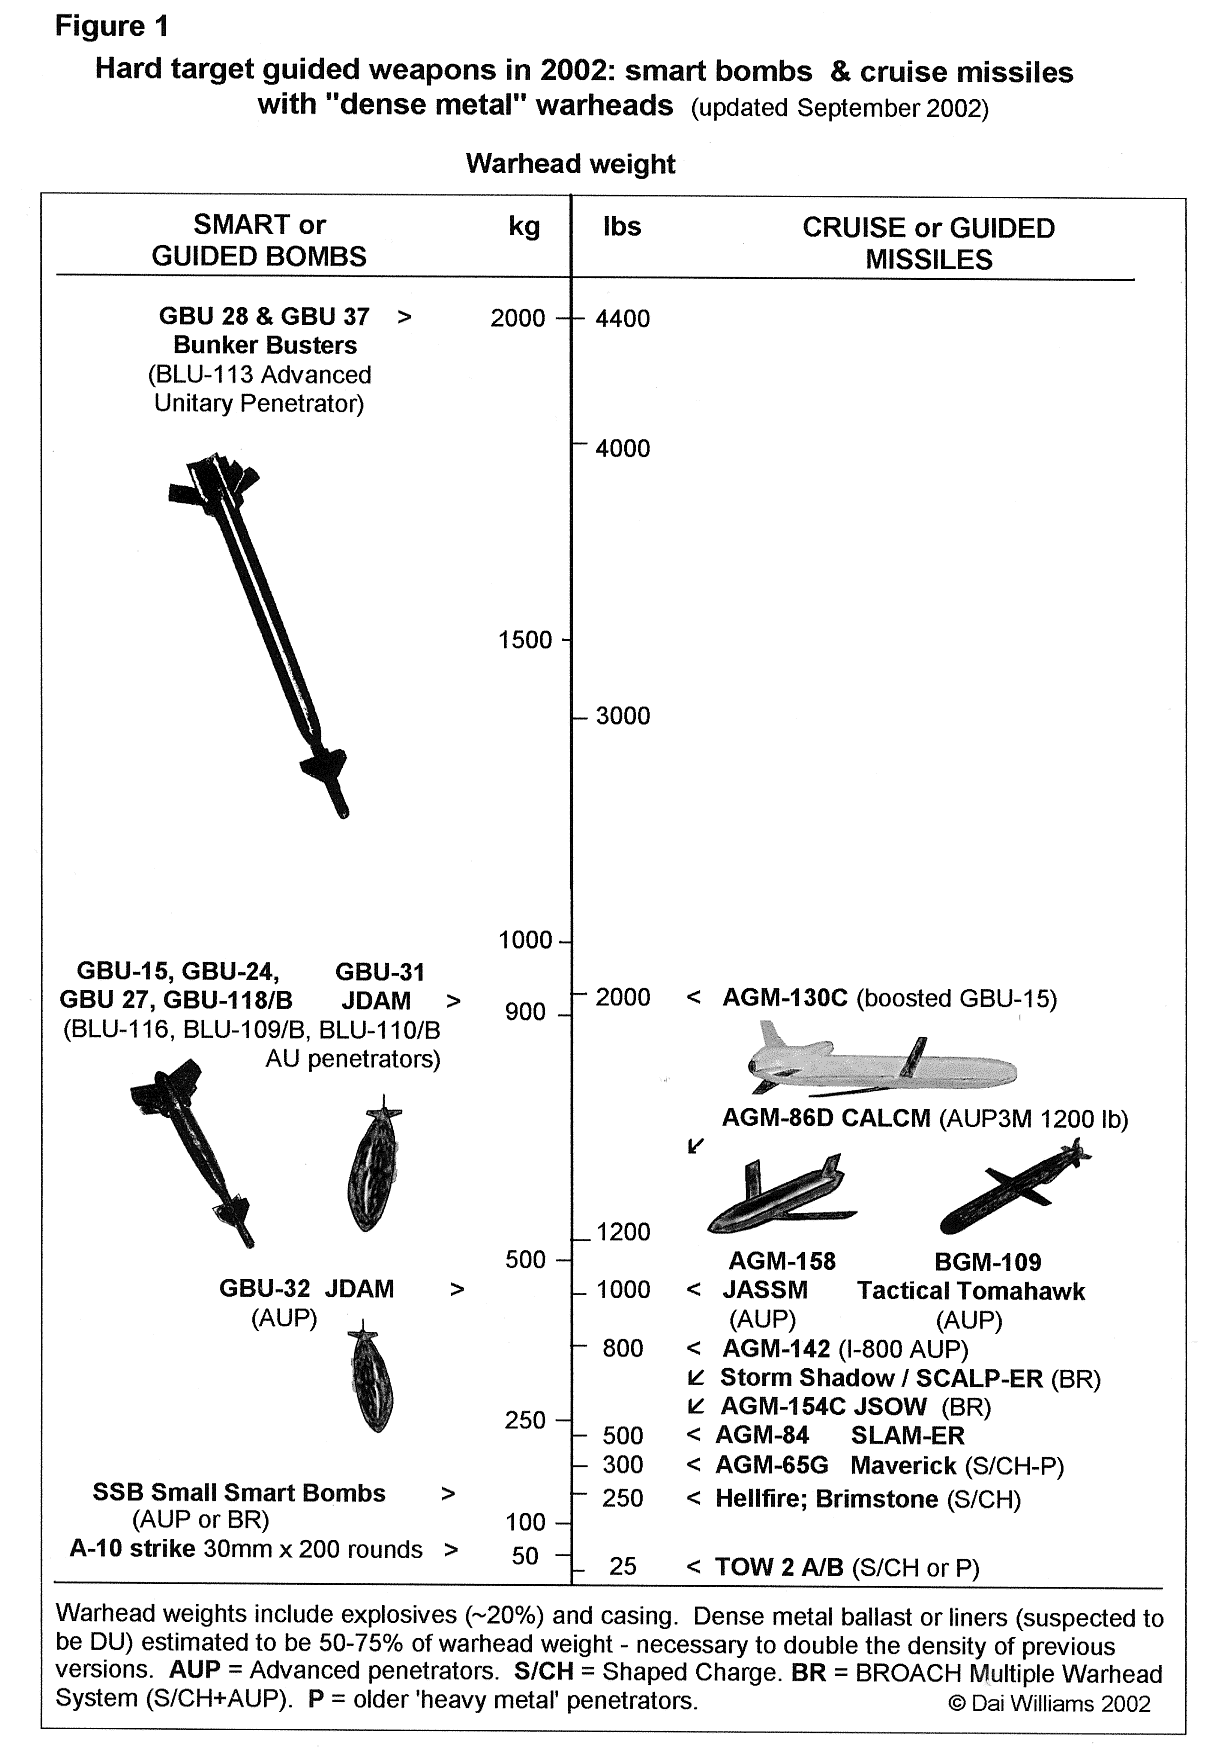 Hard target guided weapons with dense metal warheads 2002